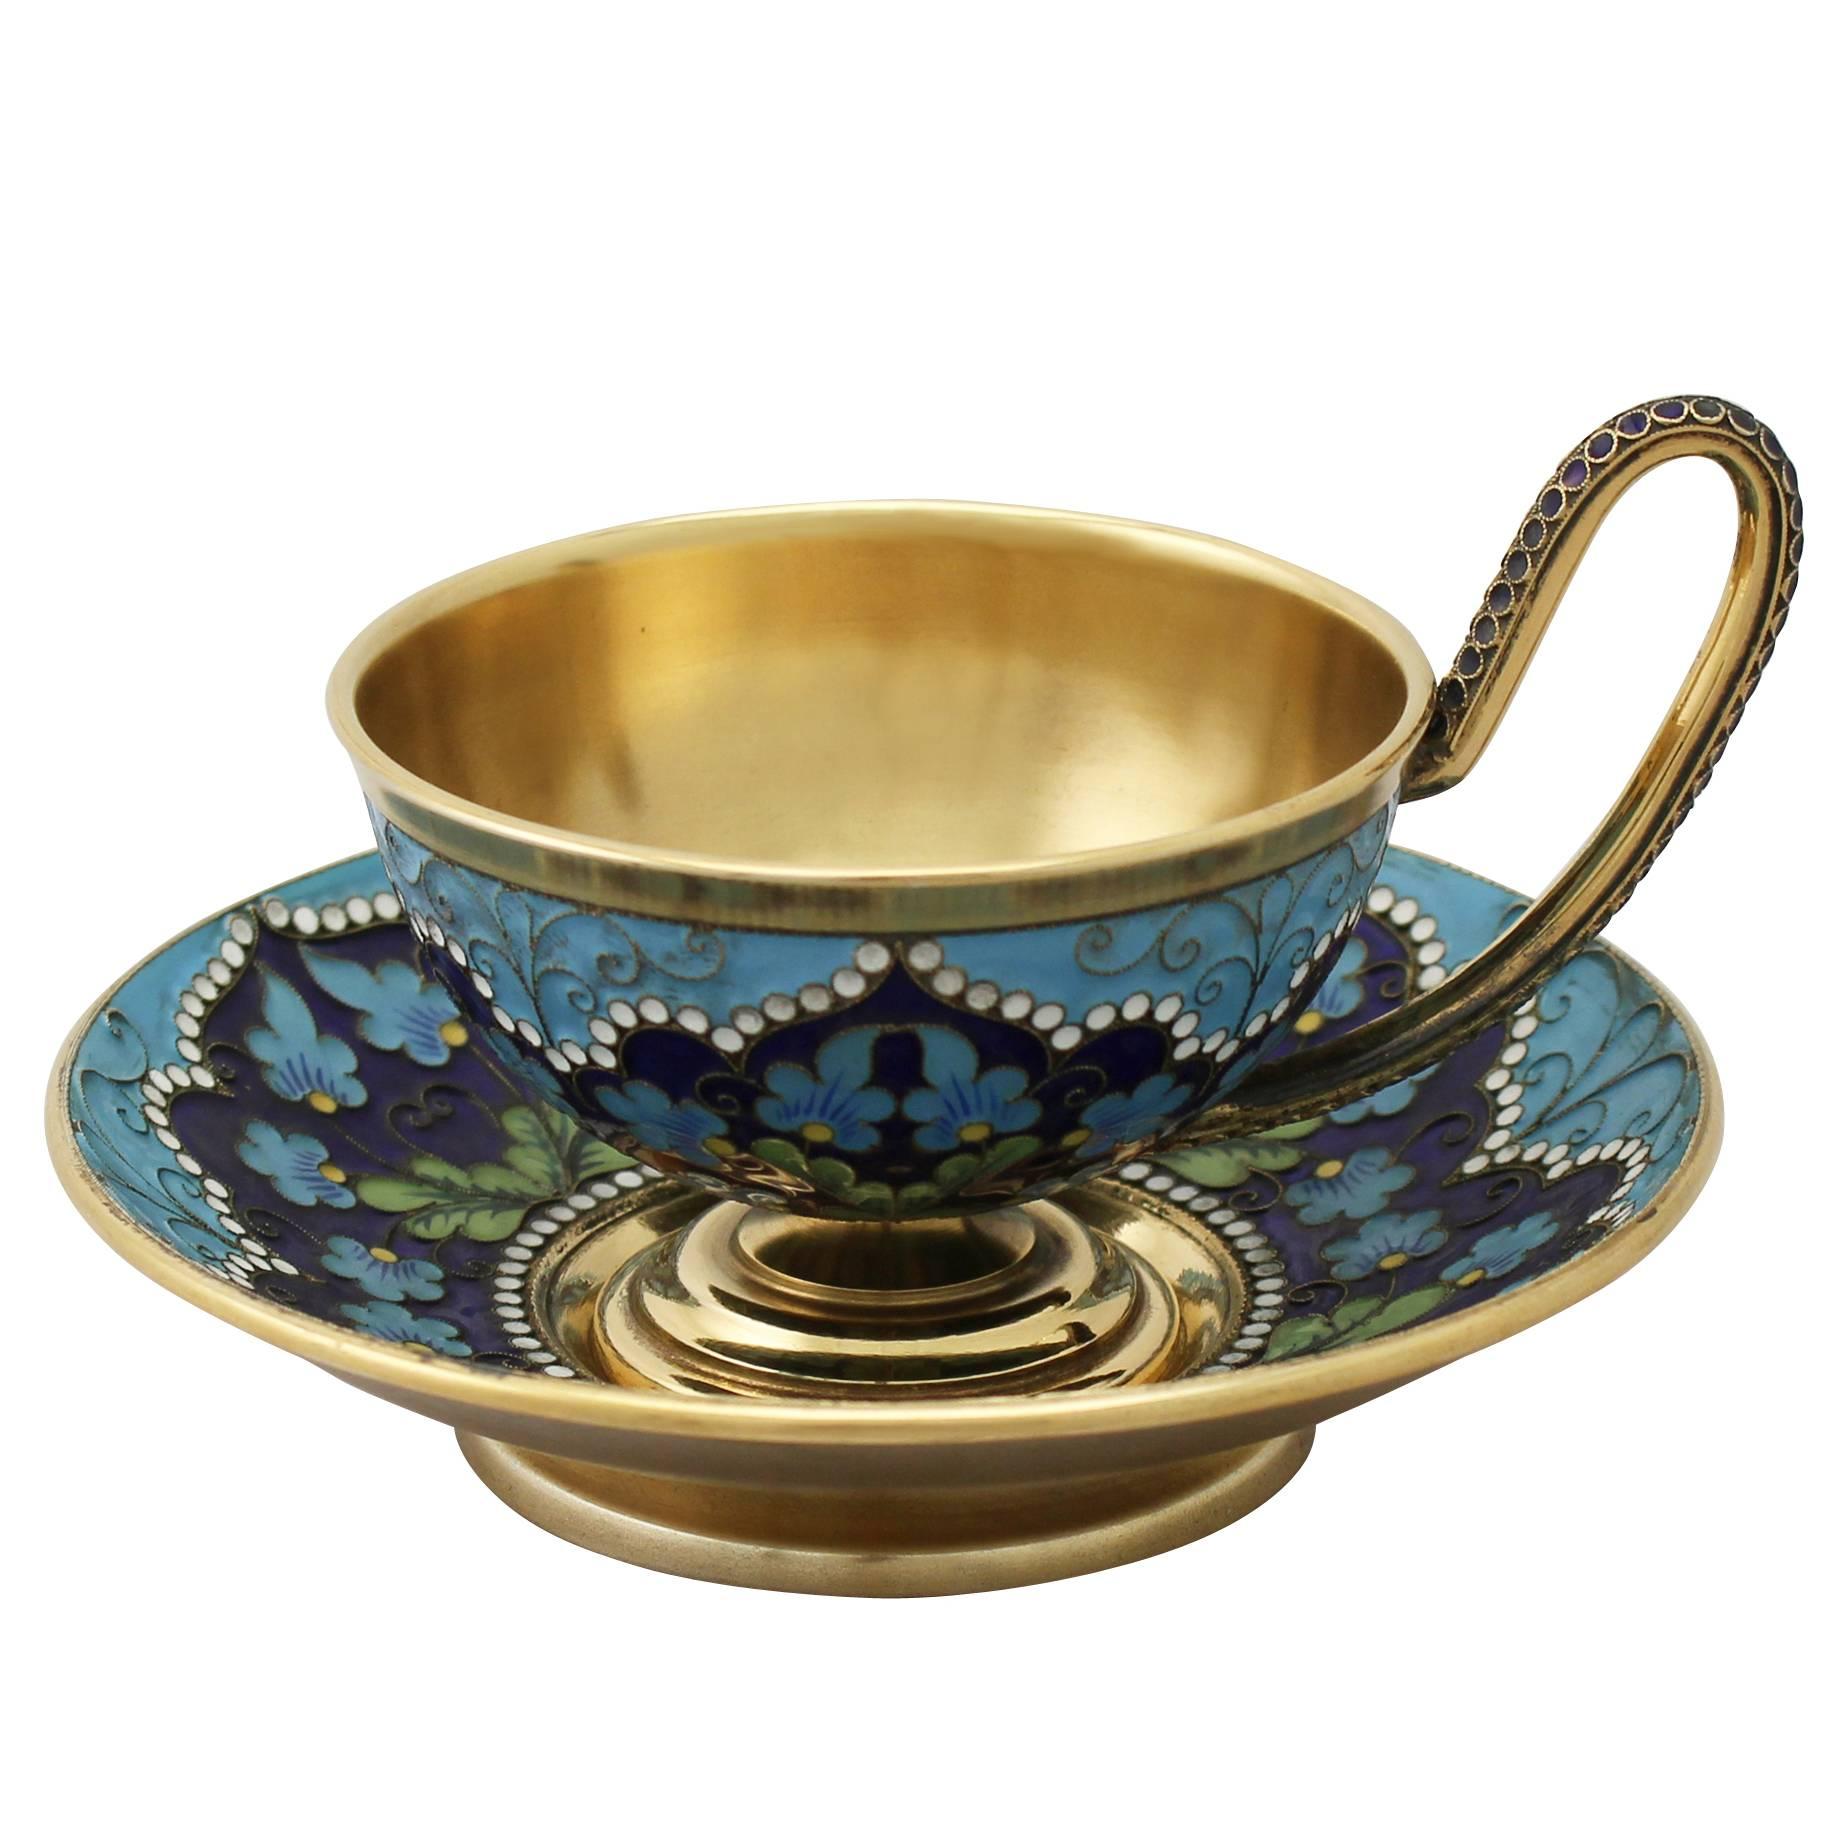 Russian Silver Gilt and Polychrome Cloisonné Enamel Cup and Saucer